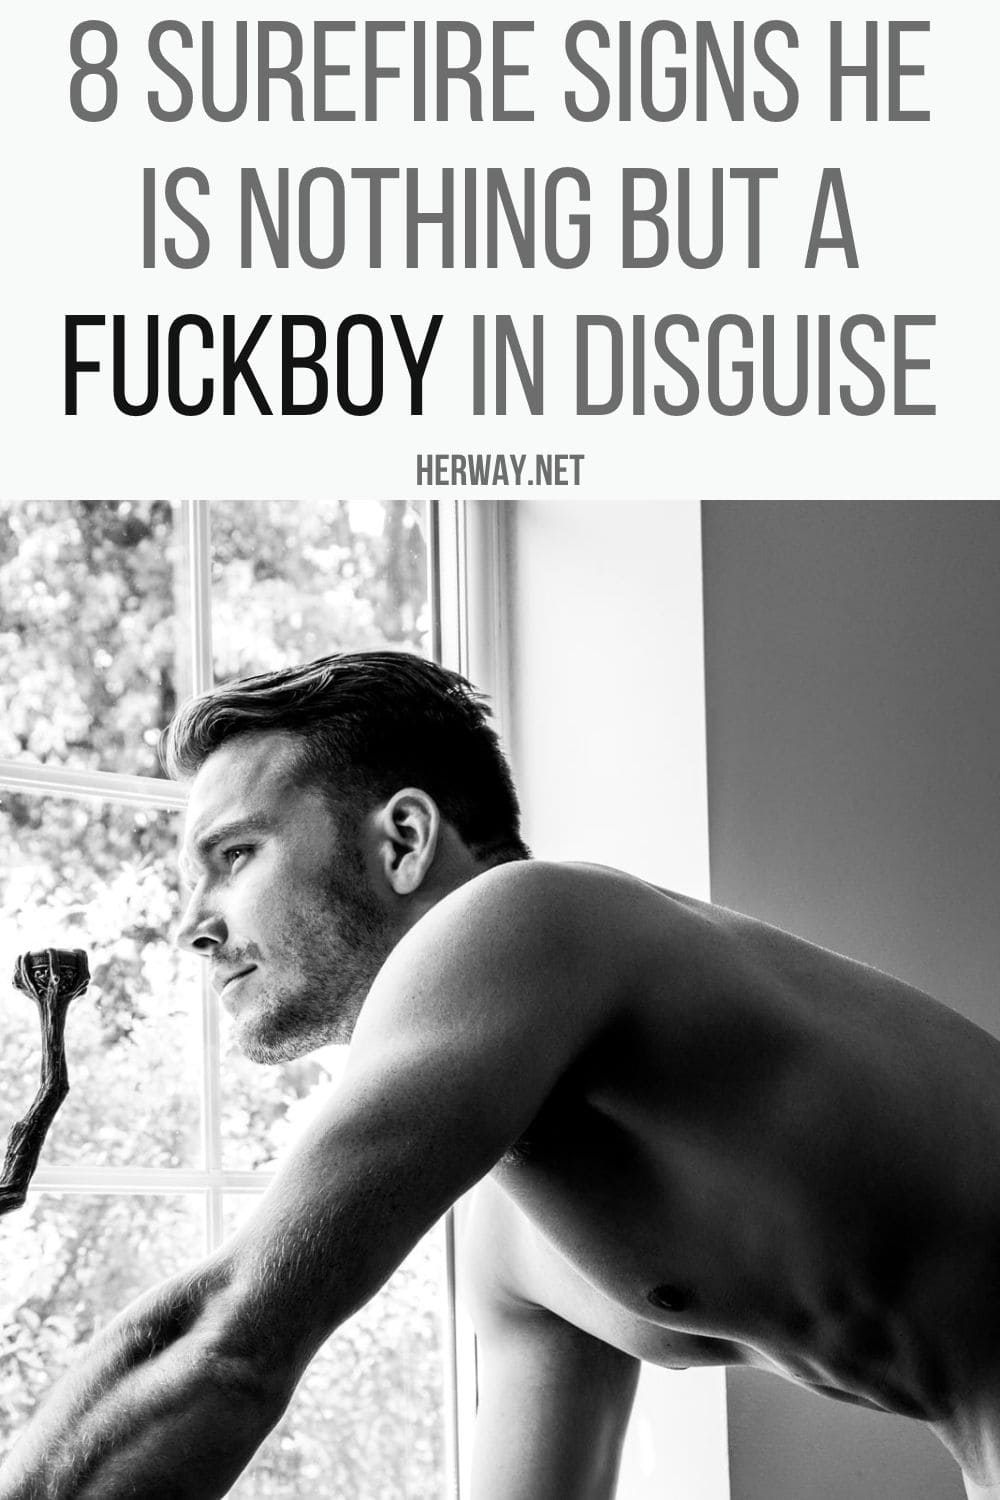 8 Surefire Signs He Is Nothing But A Fuckboy In Disguise